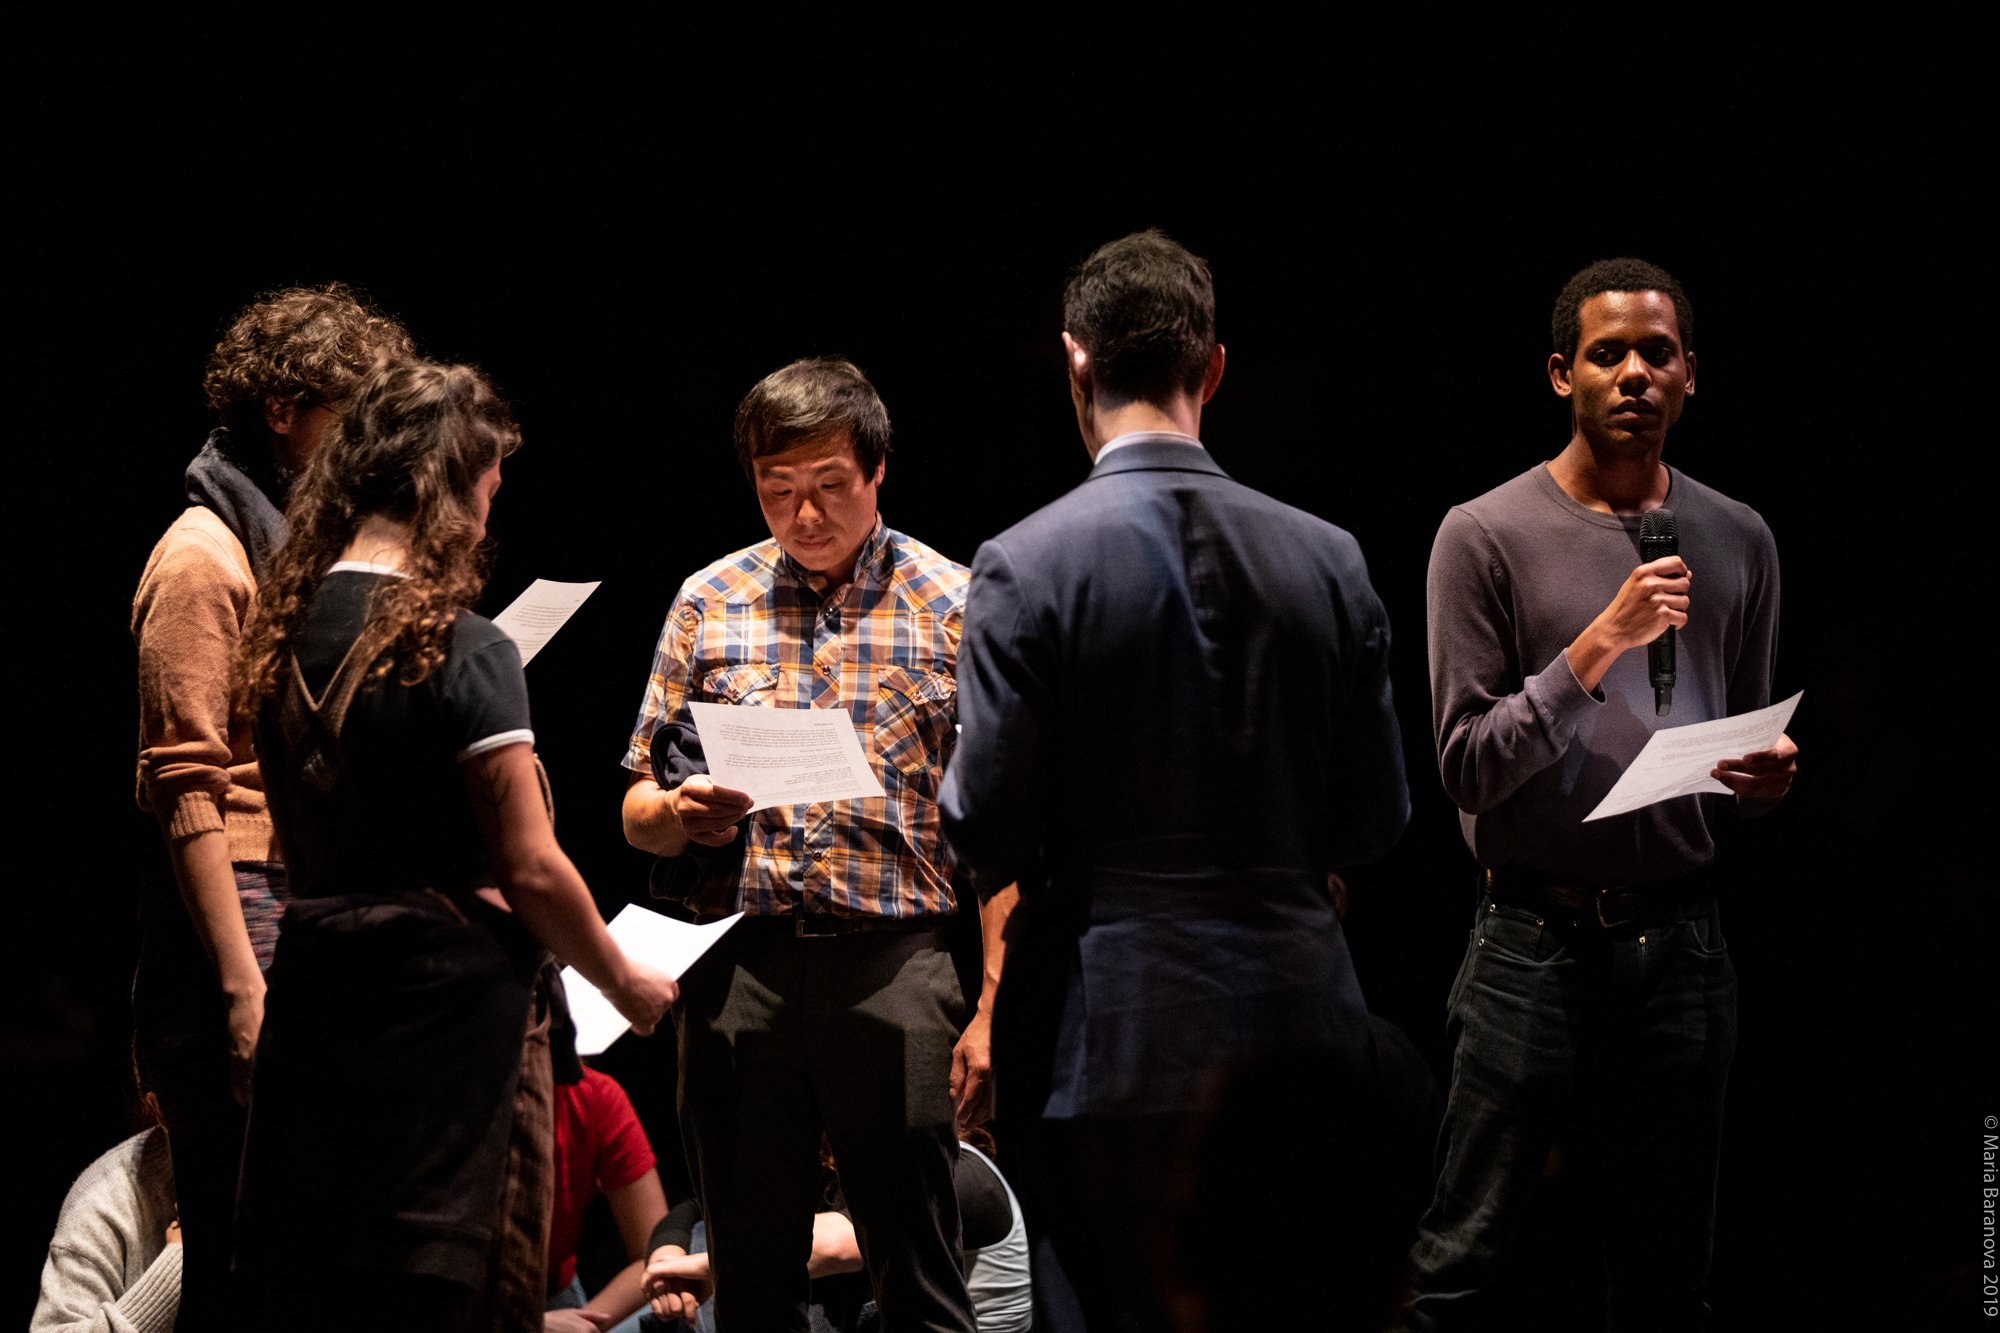 A group of people holding white paper scripts and engaged in an action together stand in a theater space. Photo by Maria Baranova.